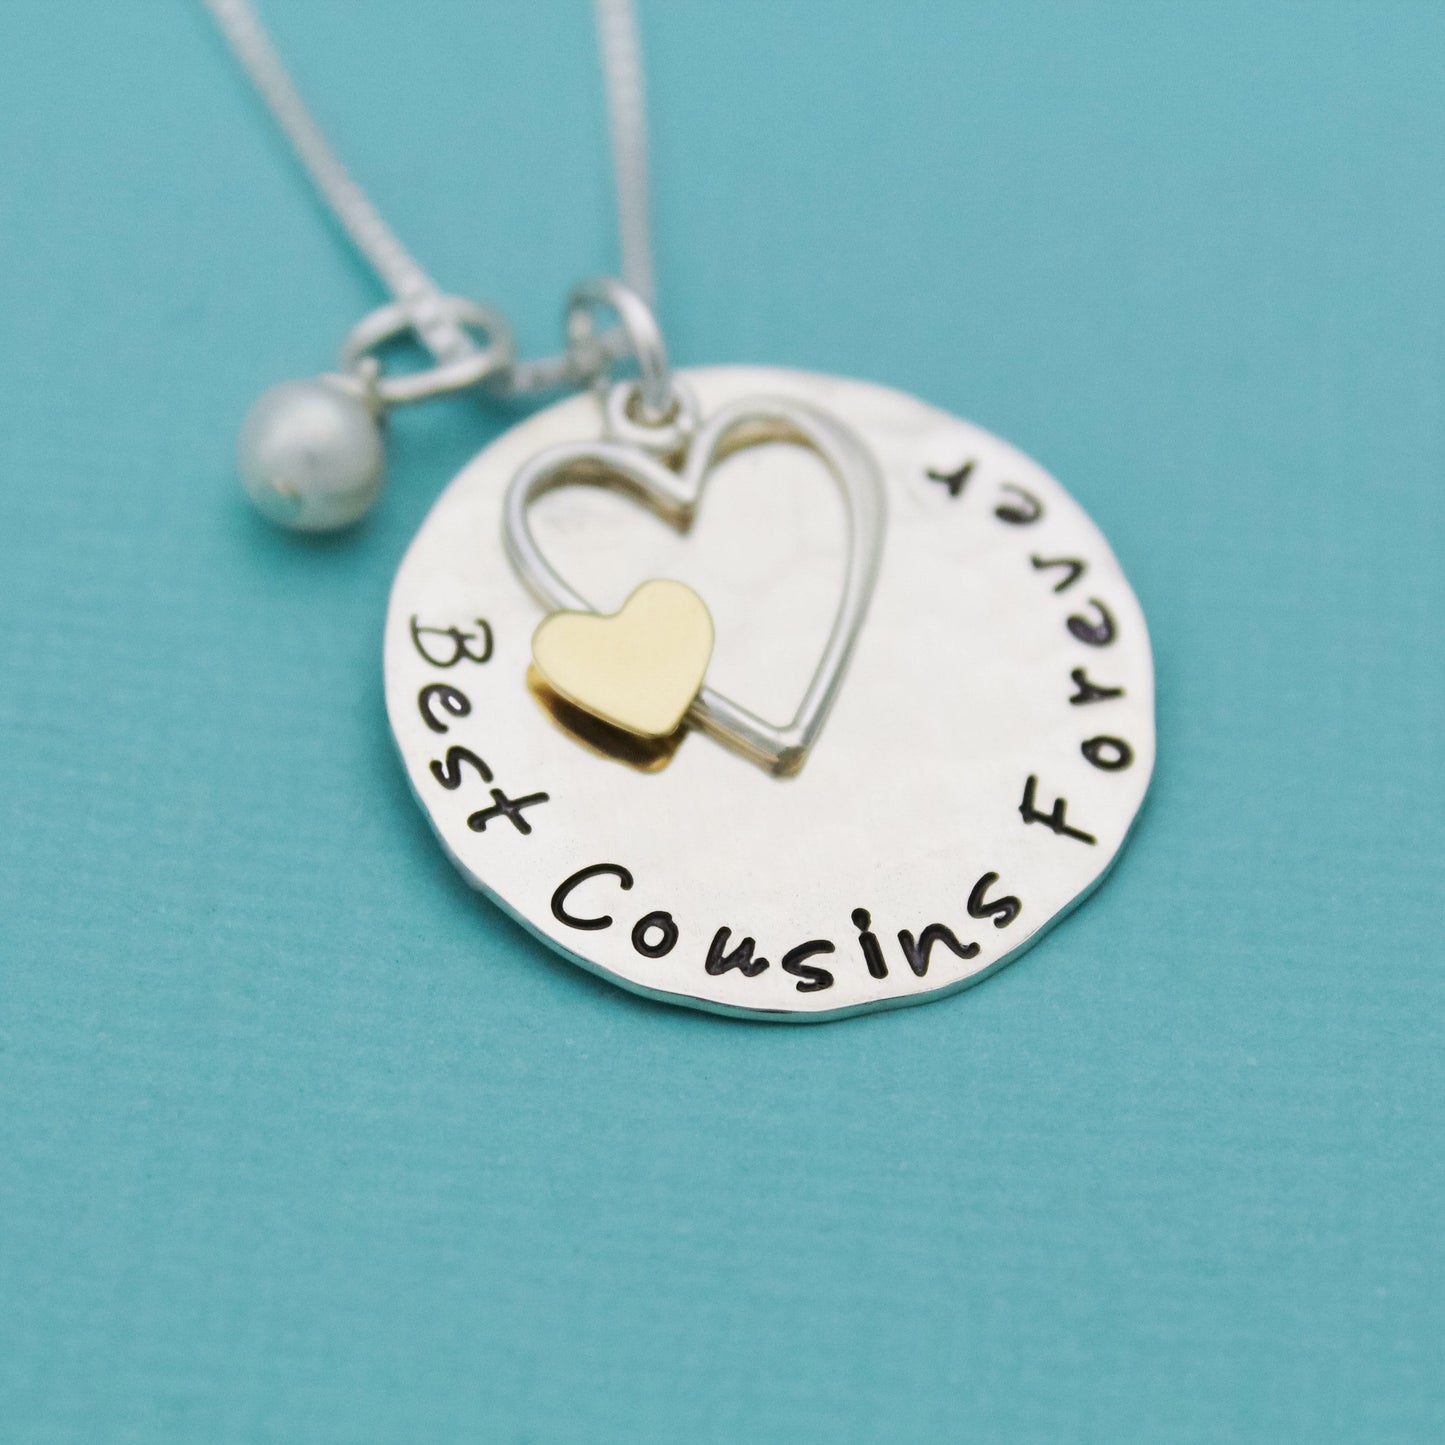 Best Cousins Forever Necklace, Cousins Gift, Cousins Necklace, Cousins Jewelry, Cousin Necklace, Hand Stamped Necklace, Cousin Necklace